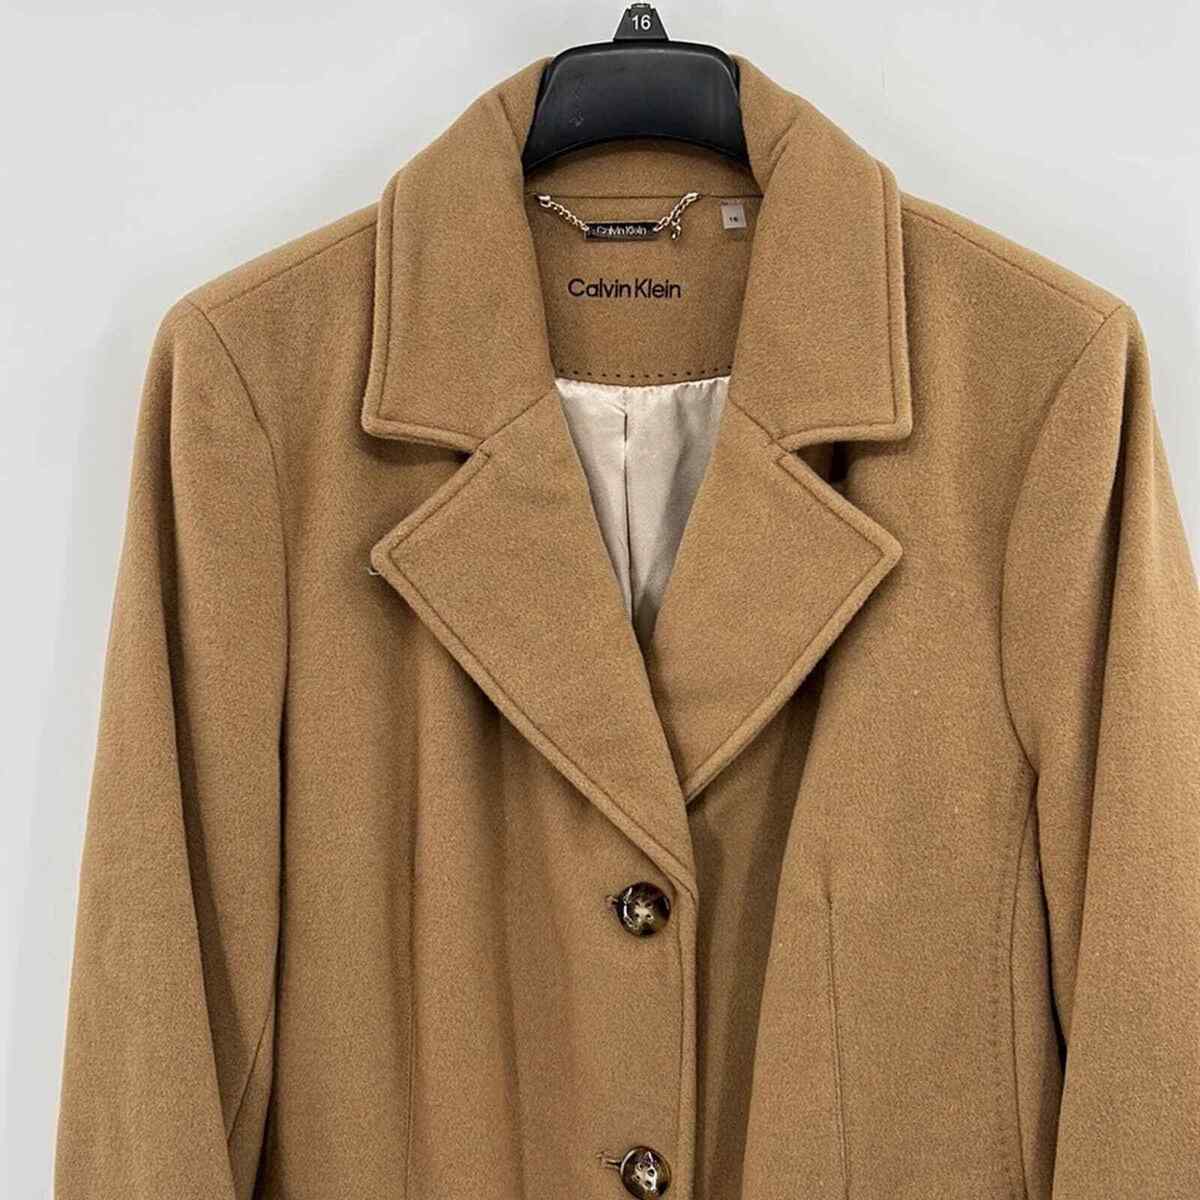 16 New Klein tags Wool - Coat Single-Breasted - with - | eBay Calvin Camel Cashmere